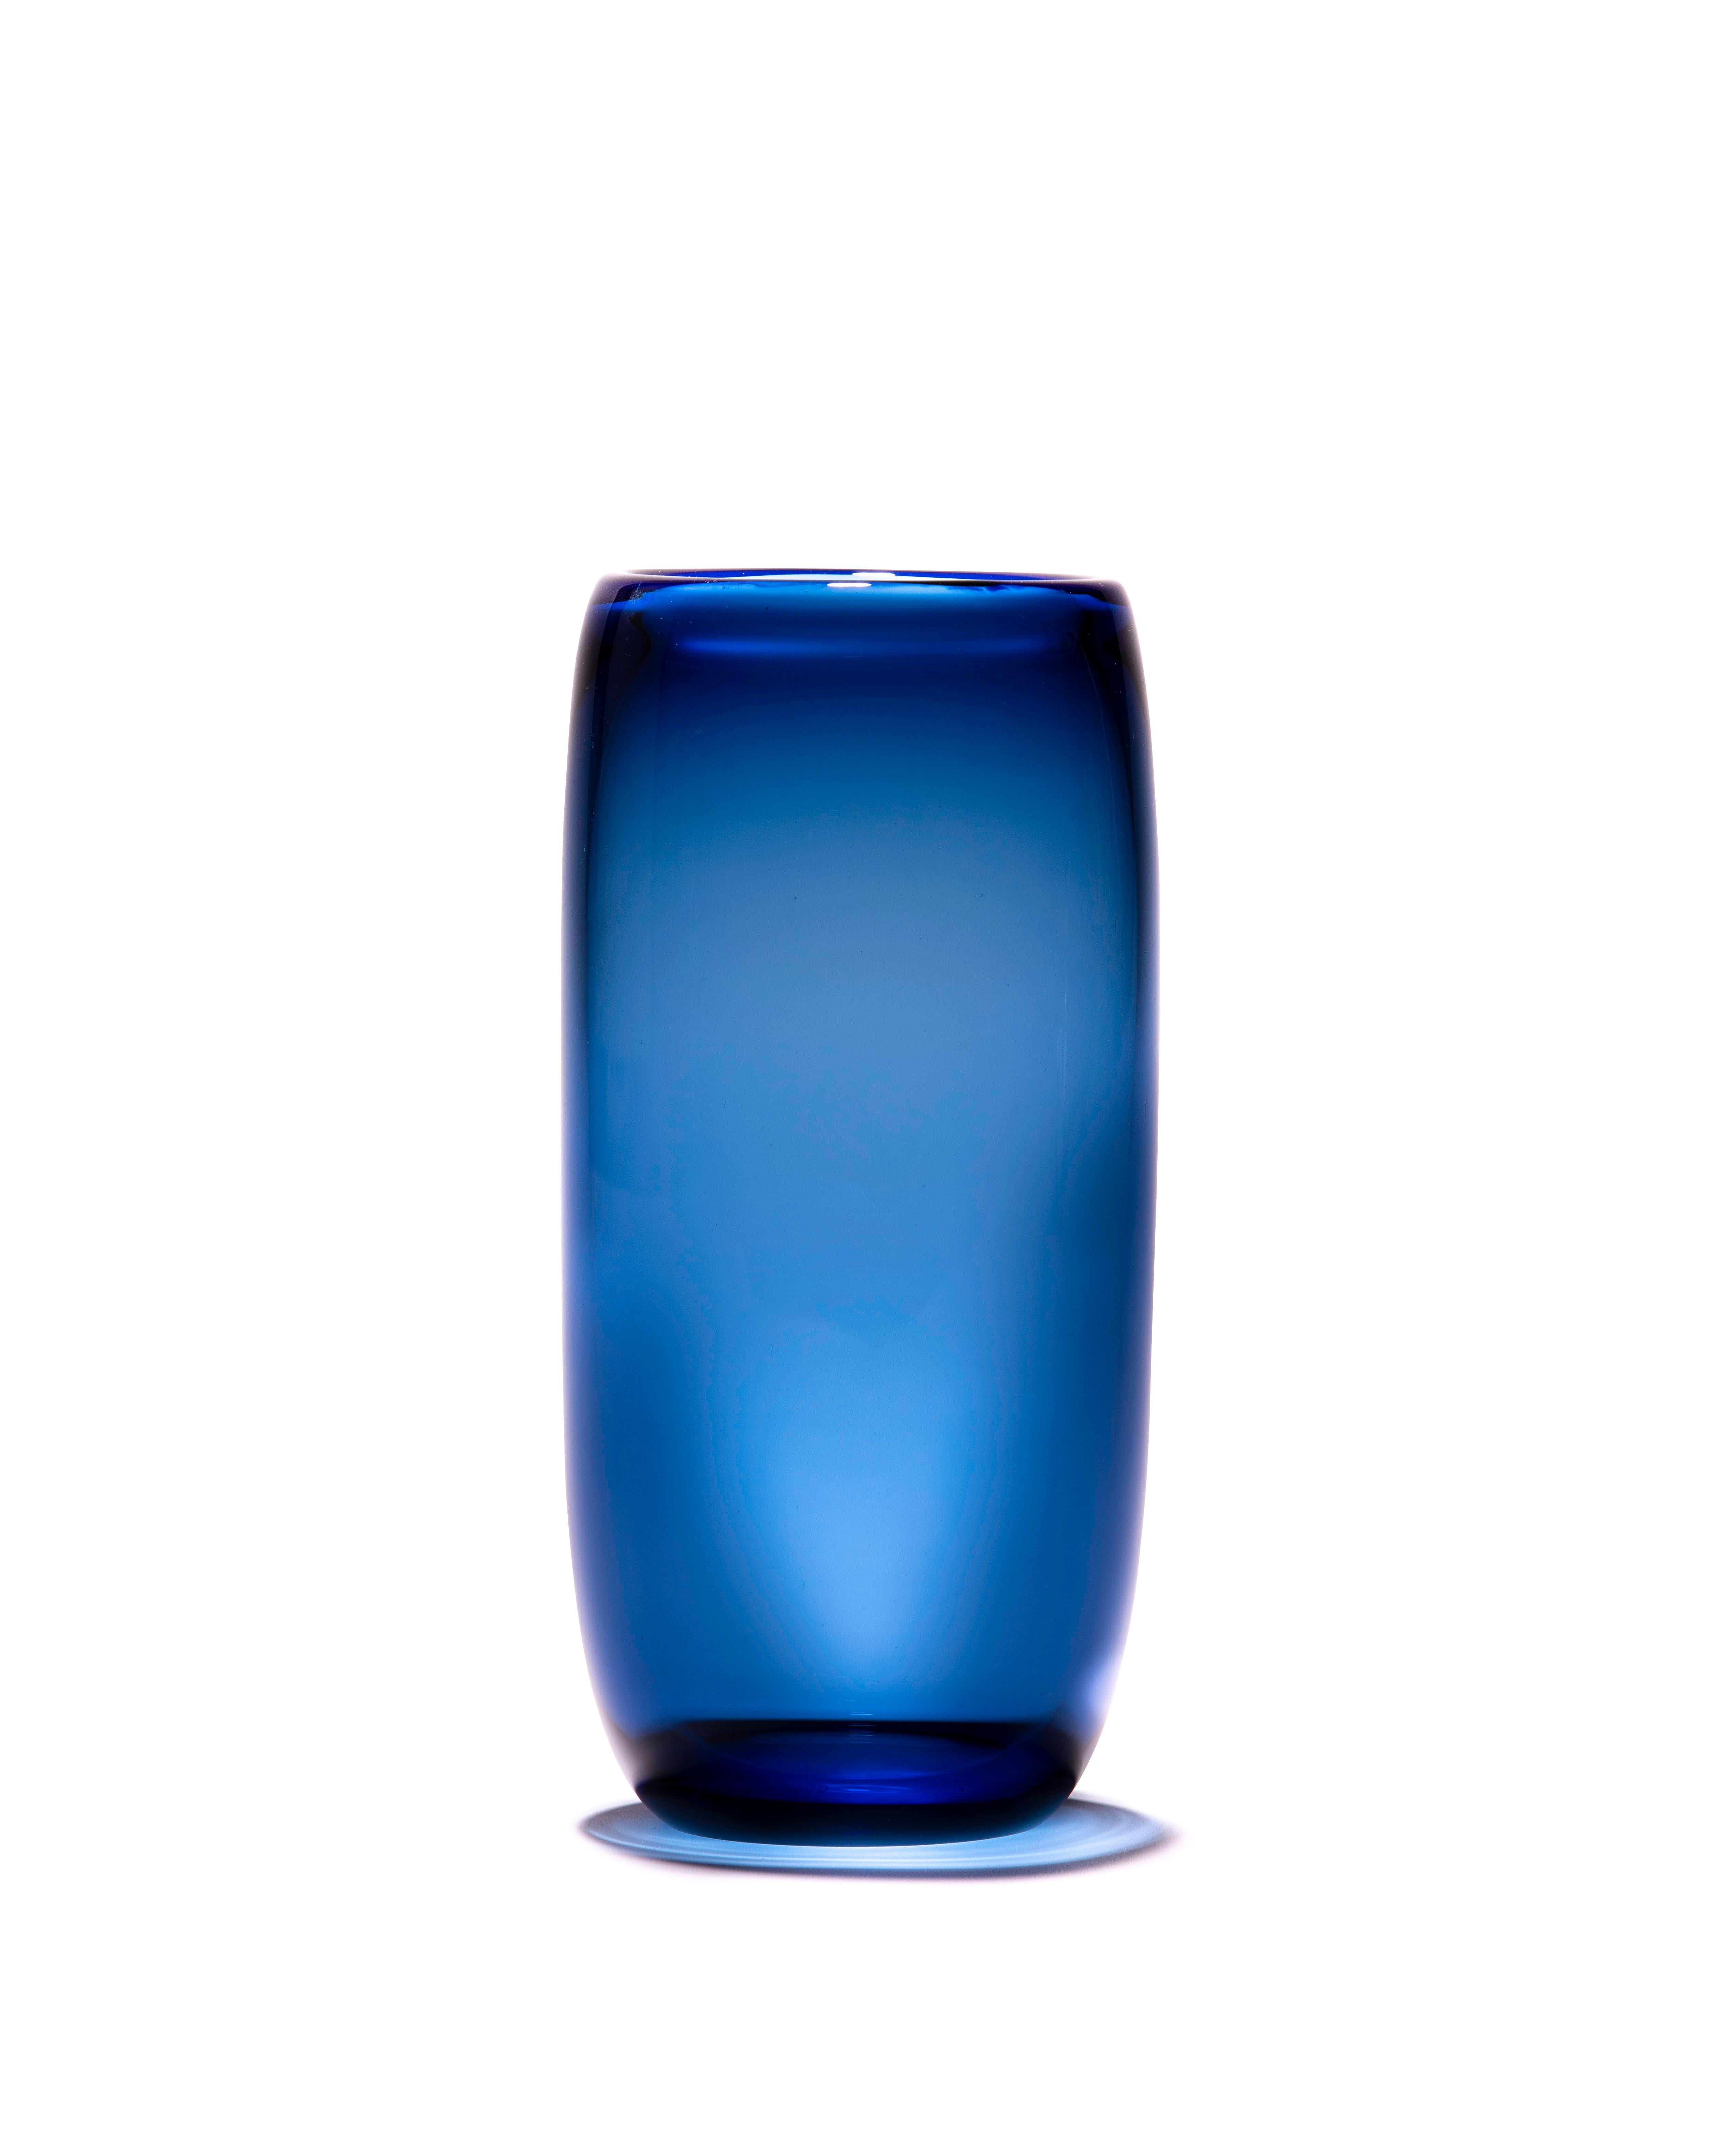 Unique Harvest Graal Blue and Black Glass Vase by Tiina Sarapu For Sale 7